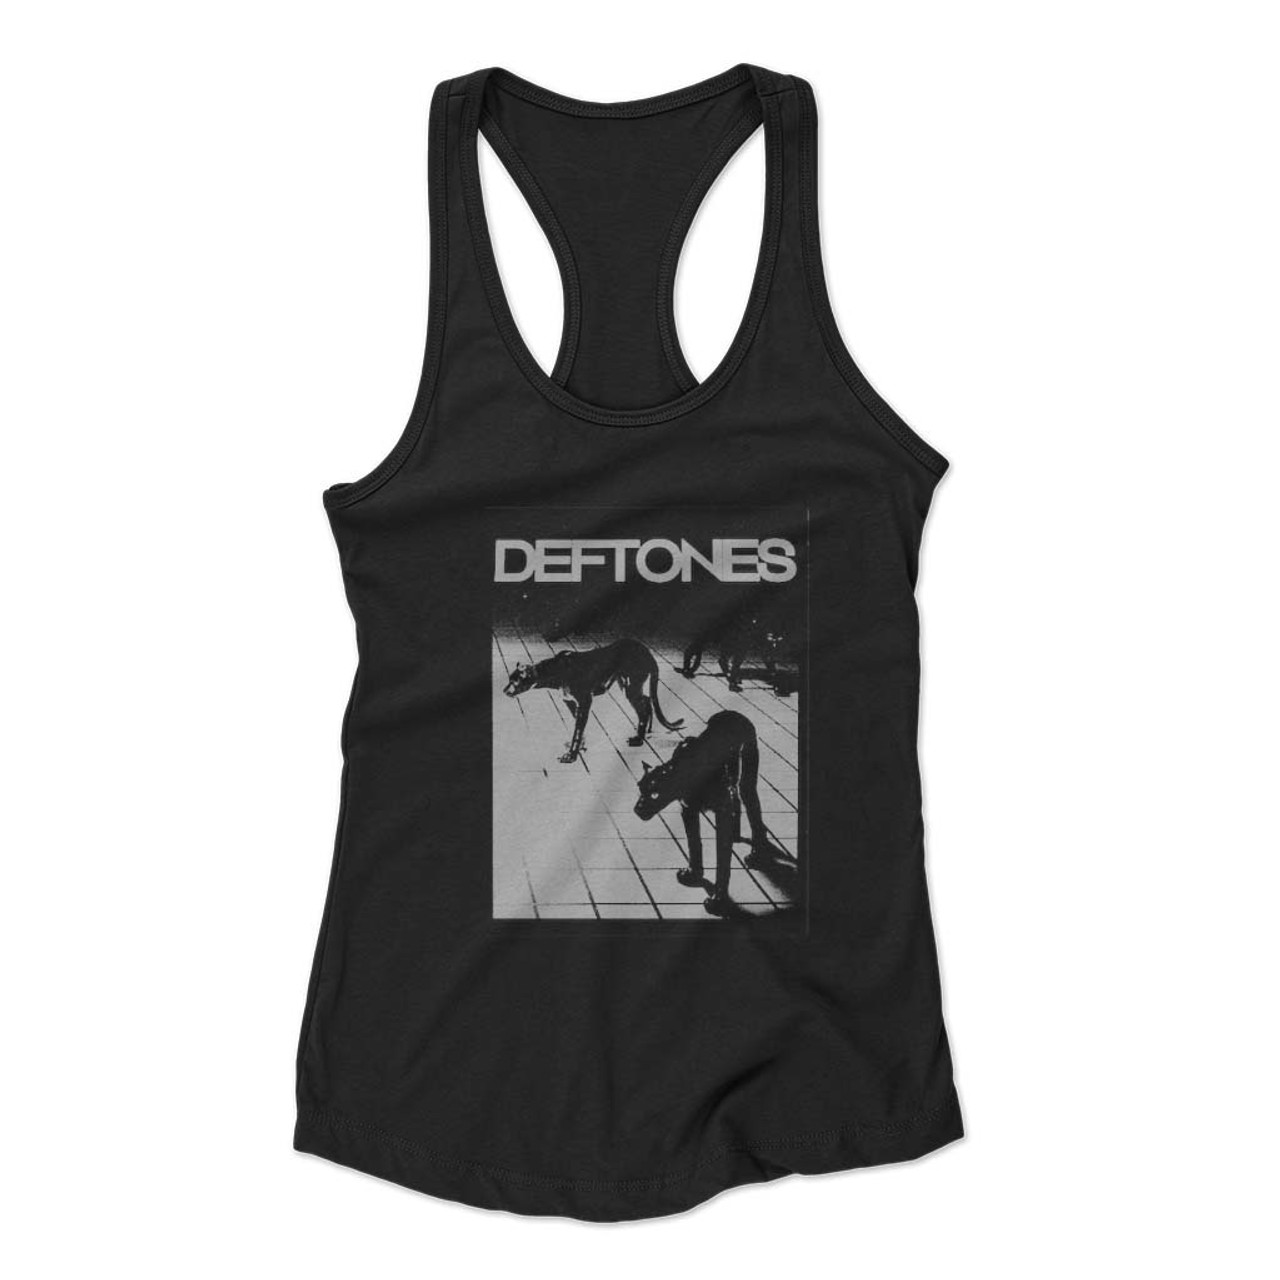 You Just Dont Know Deftones Band Womens T-Shirt Tee